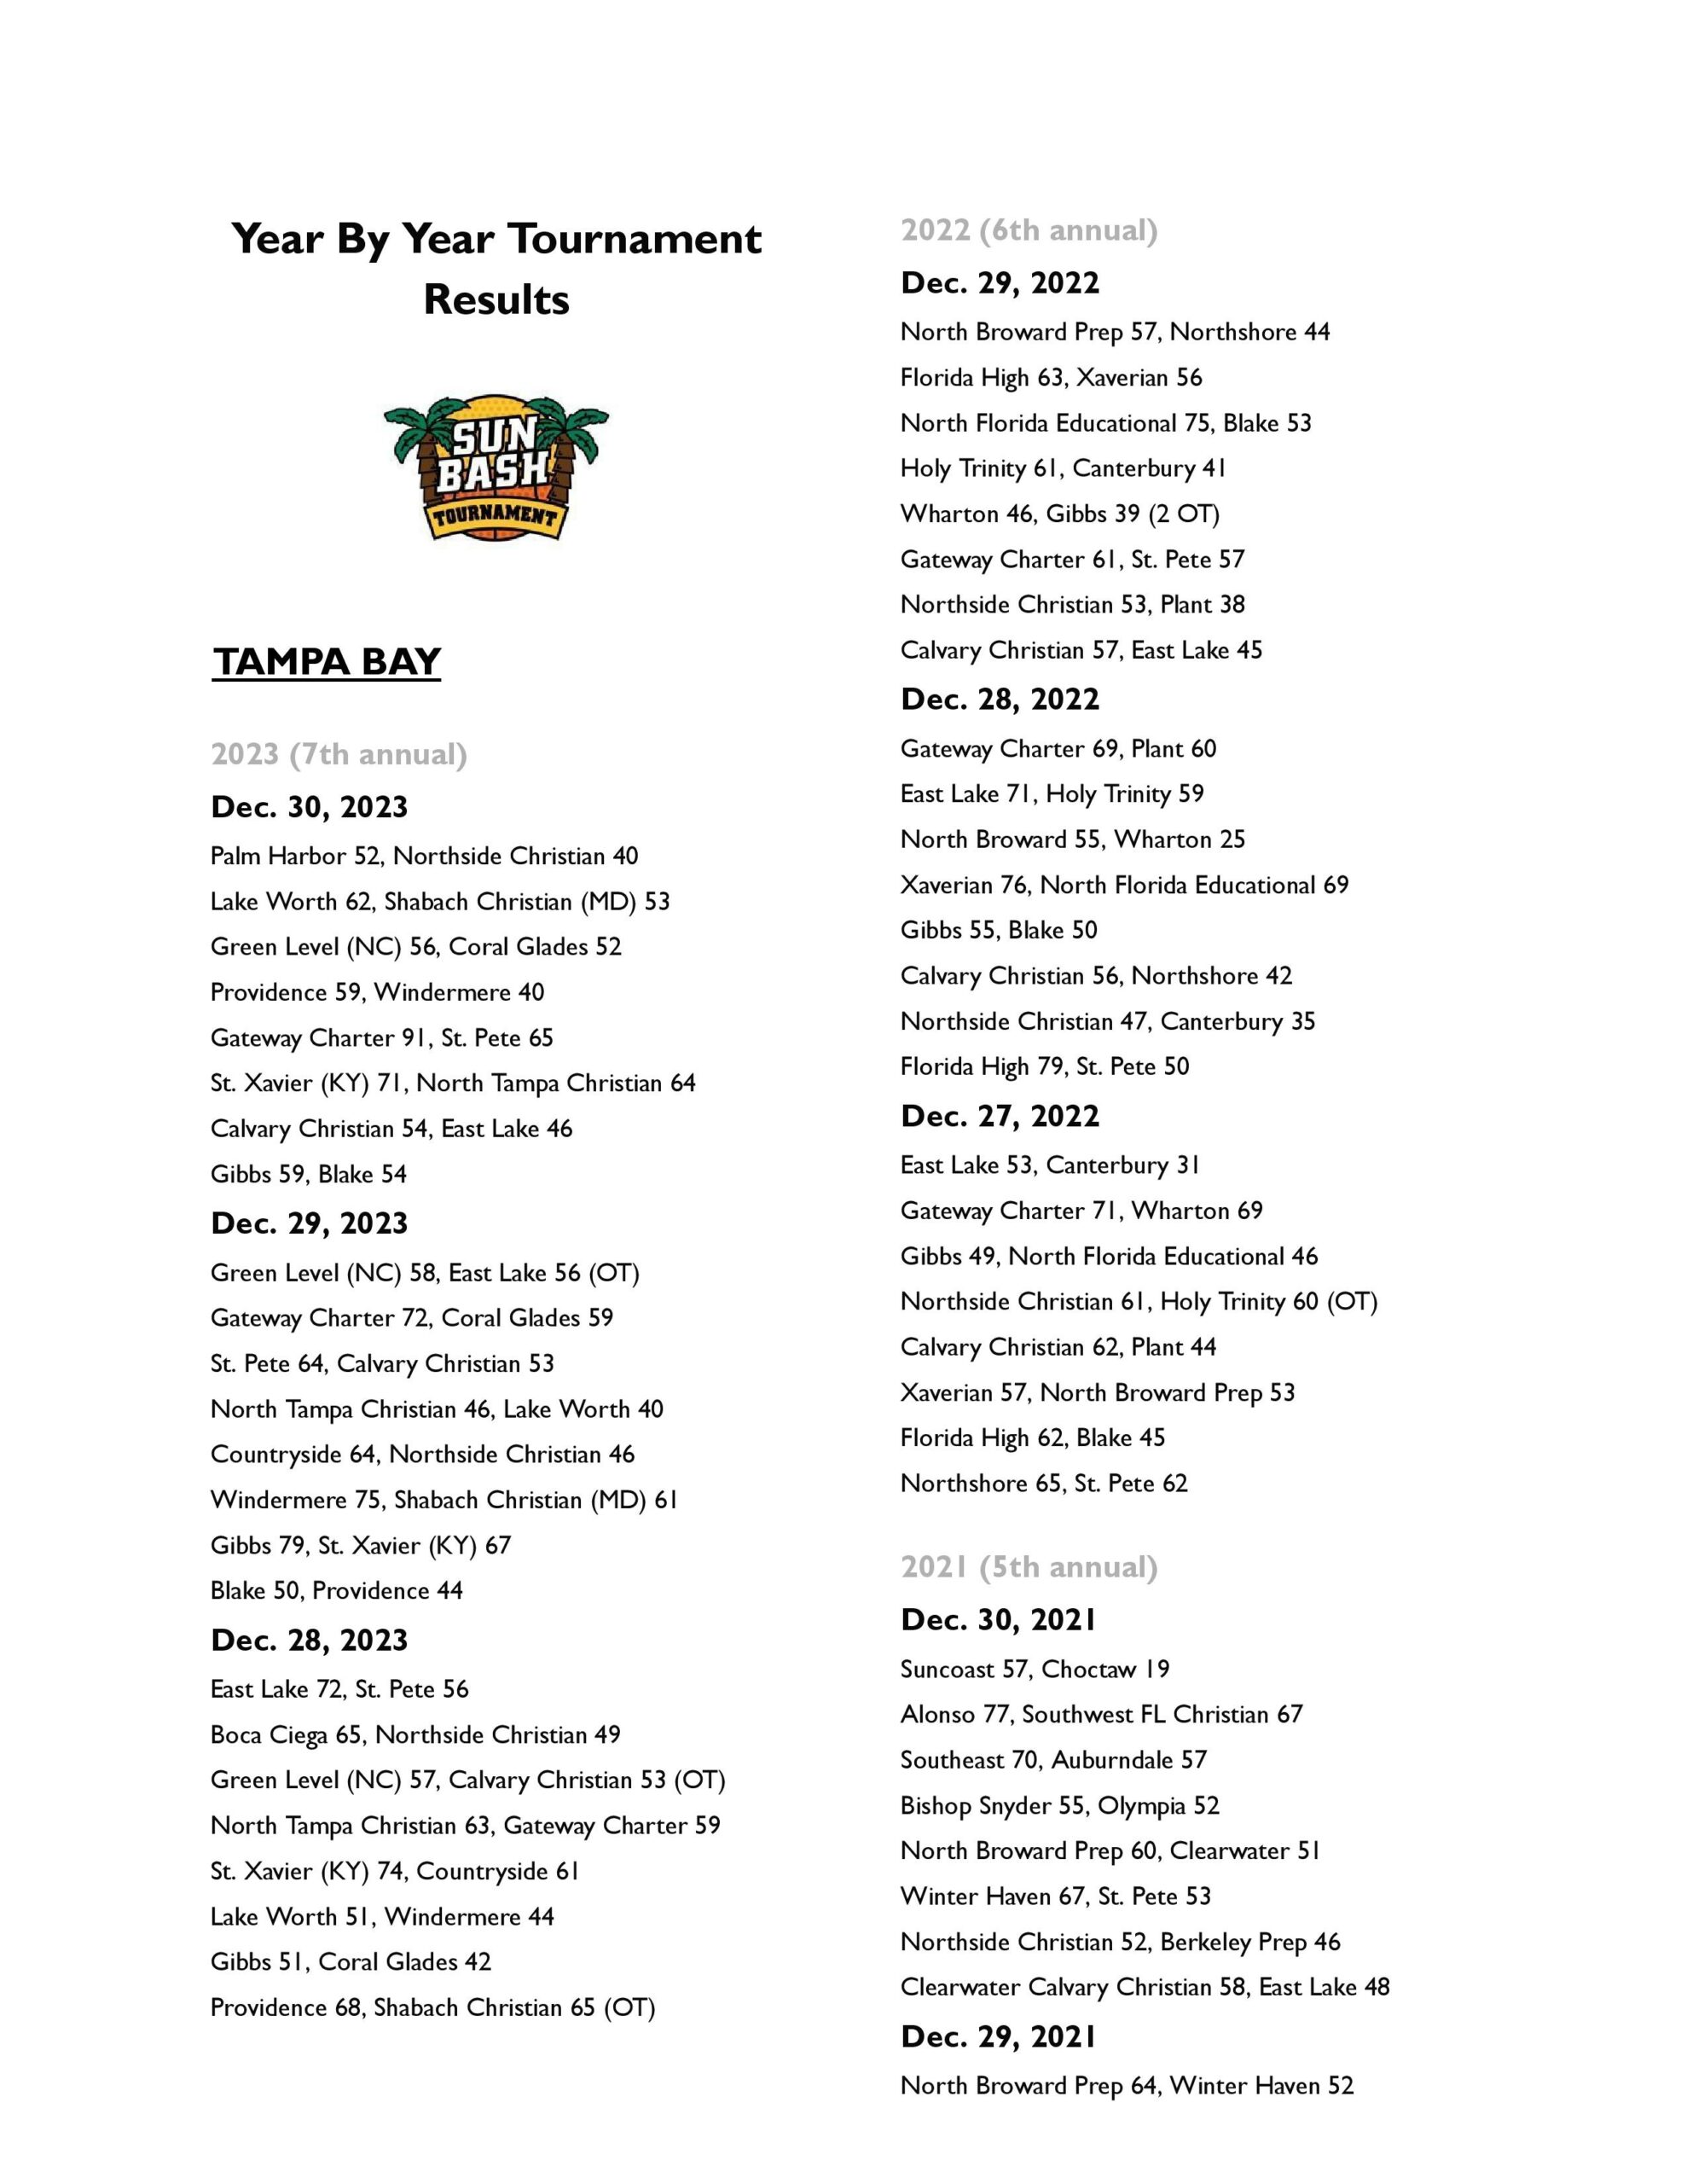 Year By Year Tournament Results (TAMPA BAY).docx-page-001